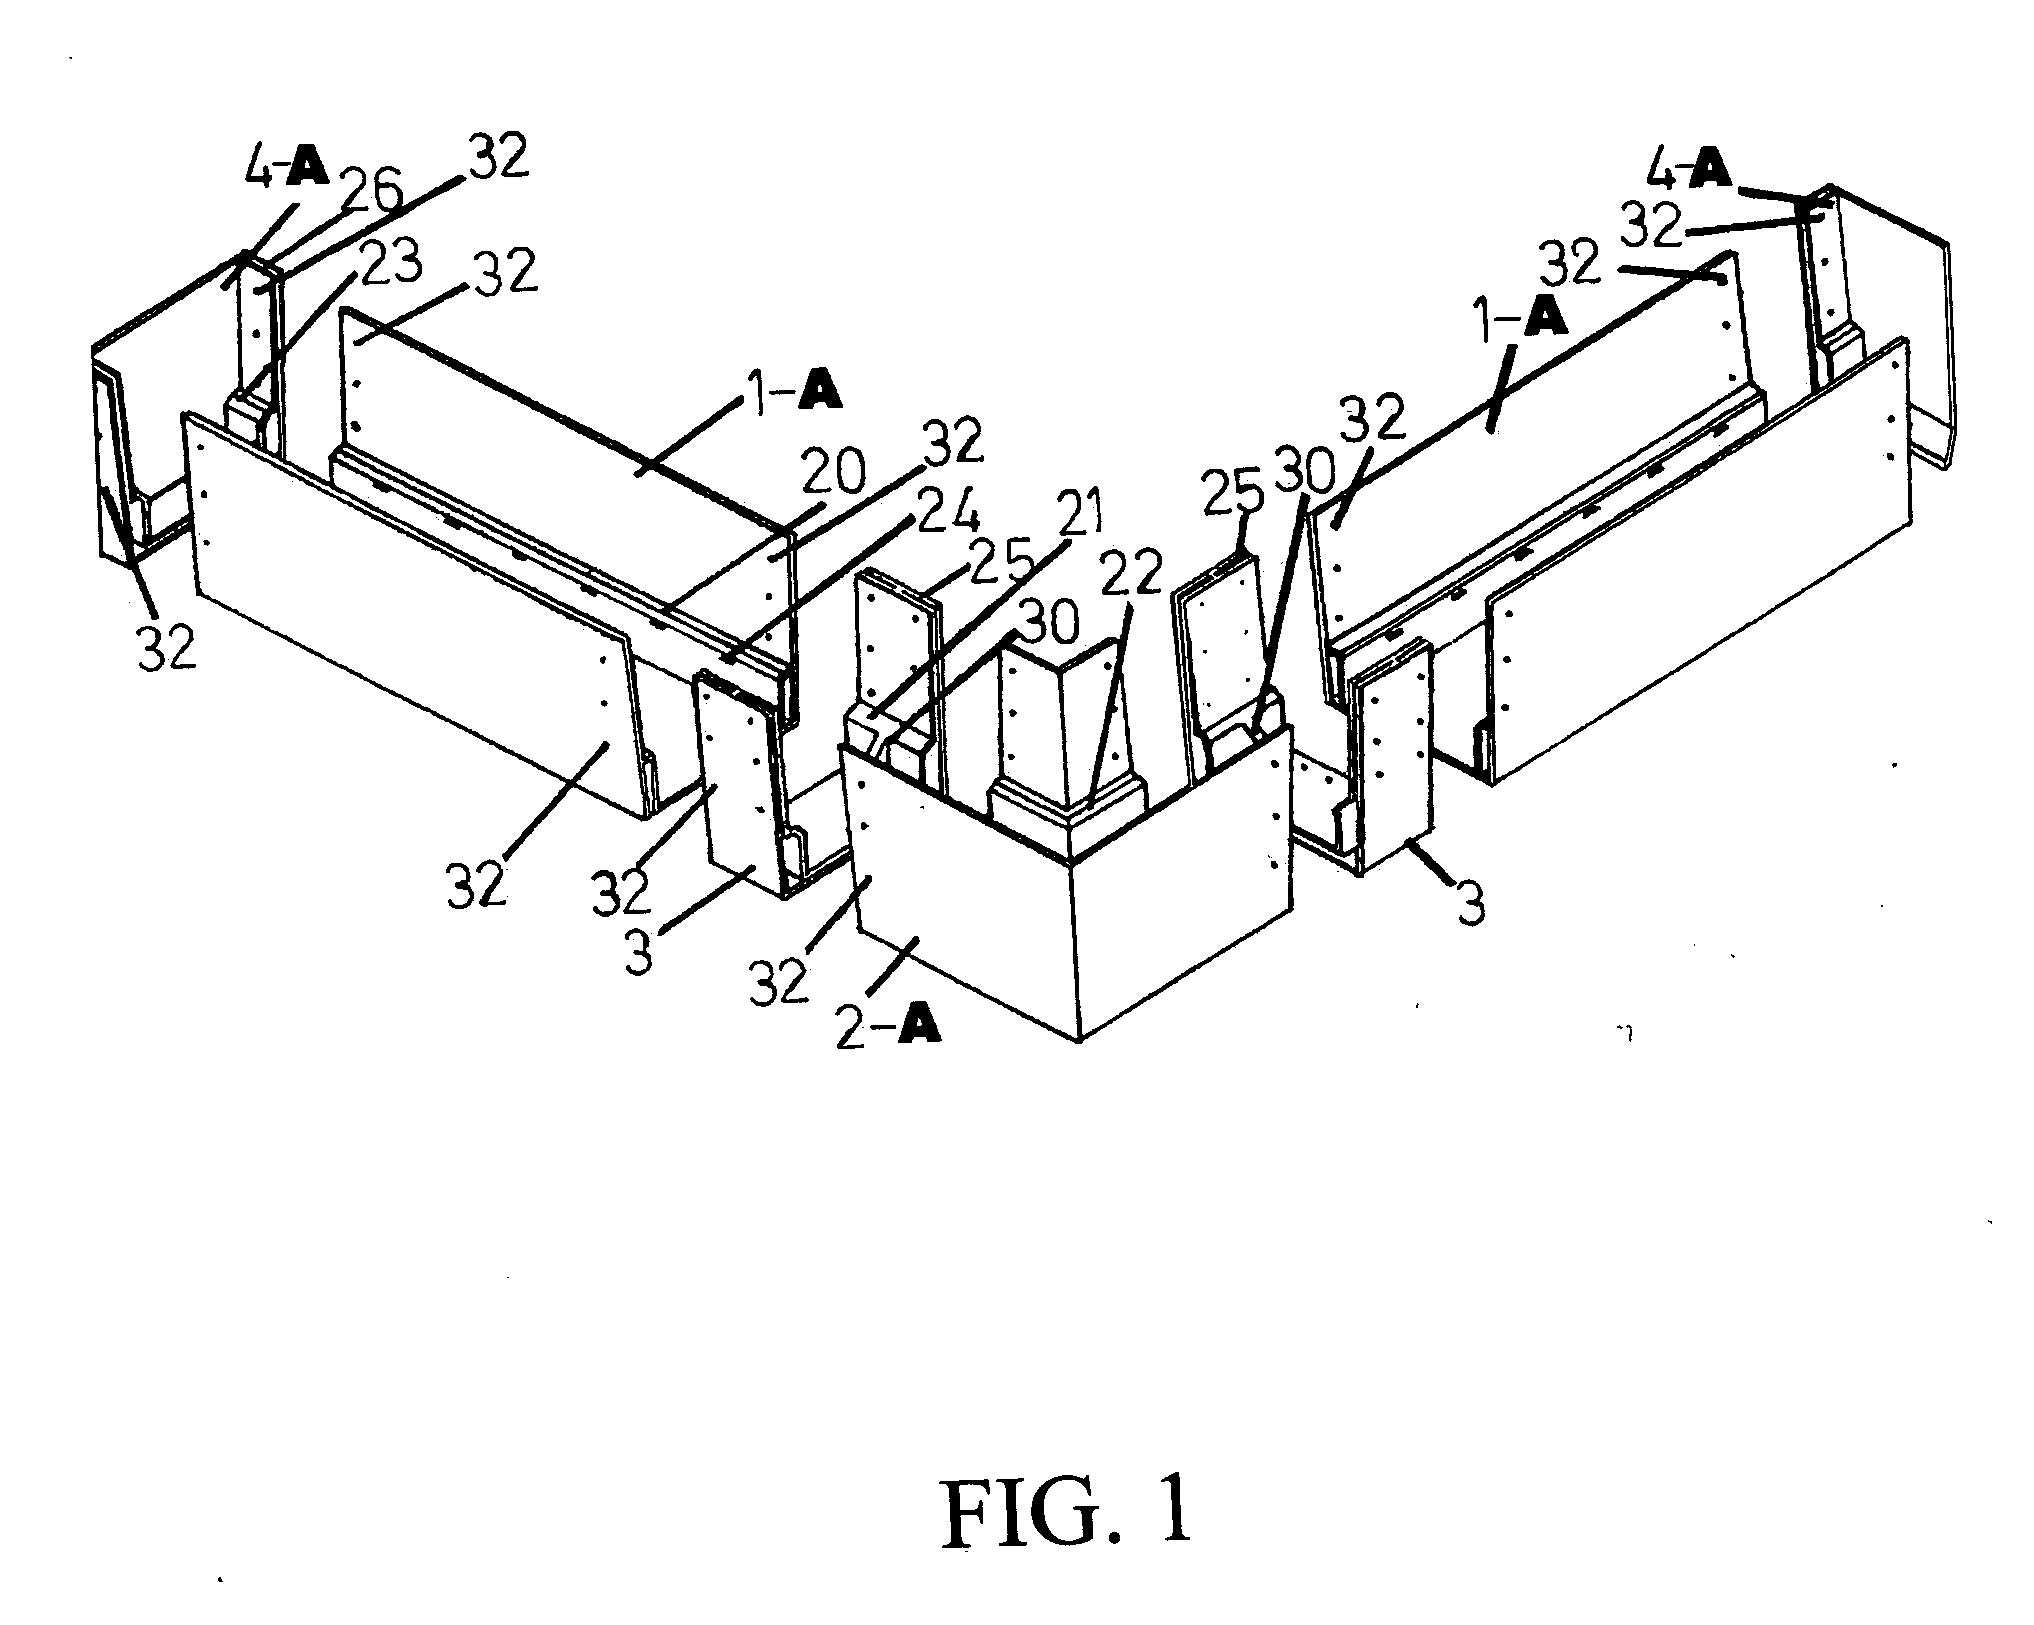 Modular flower box comprising wter drainage systemand clamp/support which is used to connect modules and which can house a lighting element